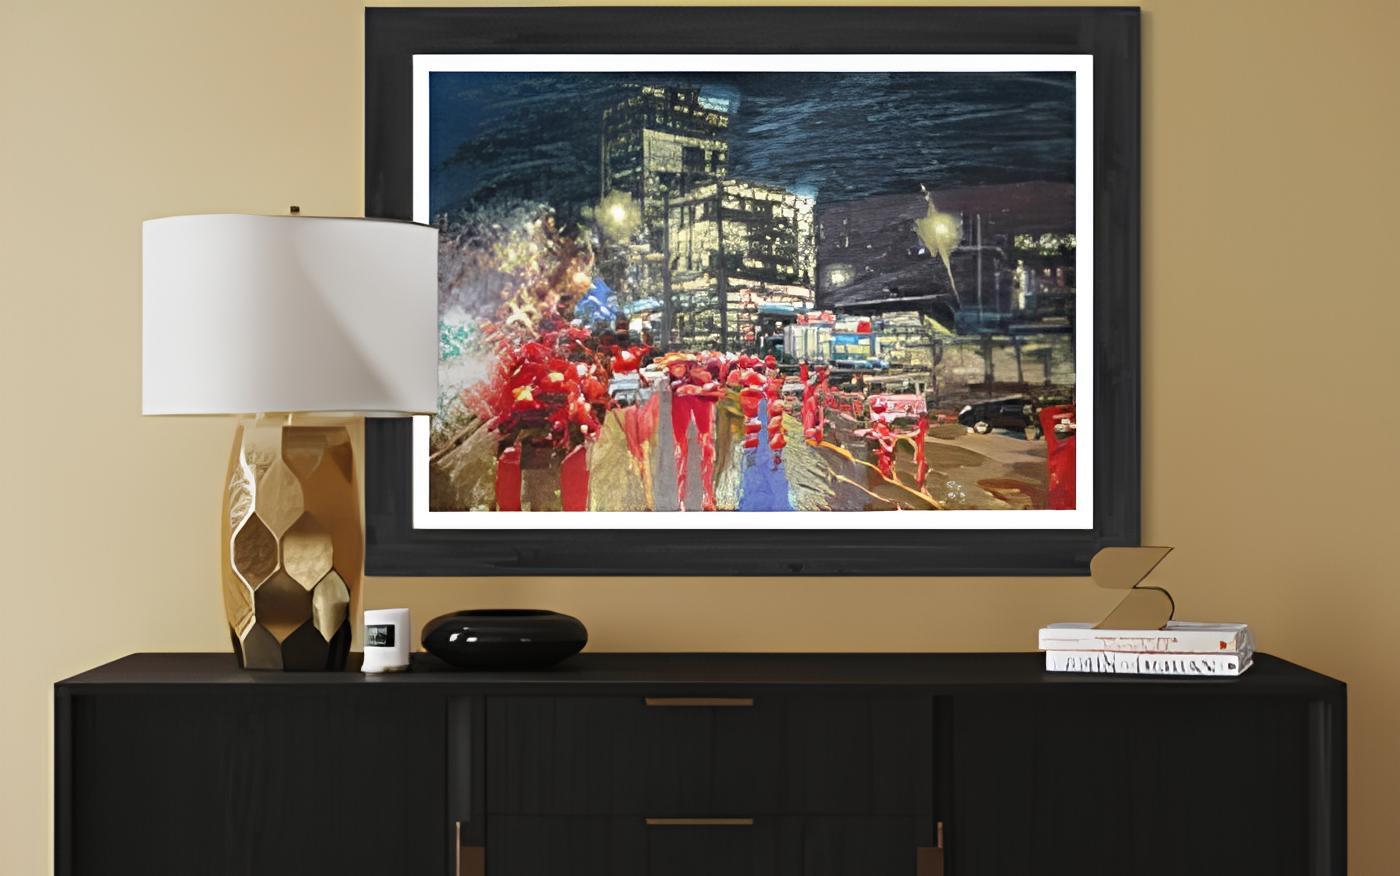 Through strokes of oil on paper, I crafted a nocturnal dance of colors and light, merging impressionism with a touch of realism. This scene captures the pulsating life of the city at night: vibrant, mysterious, and ever-moving. The illuminated